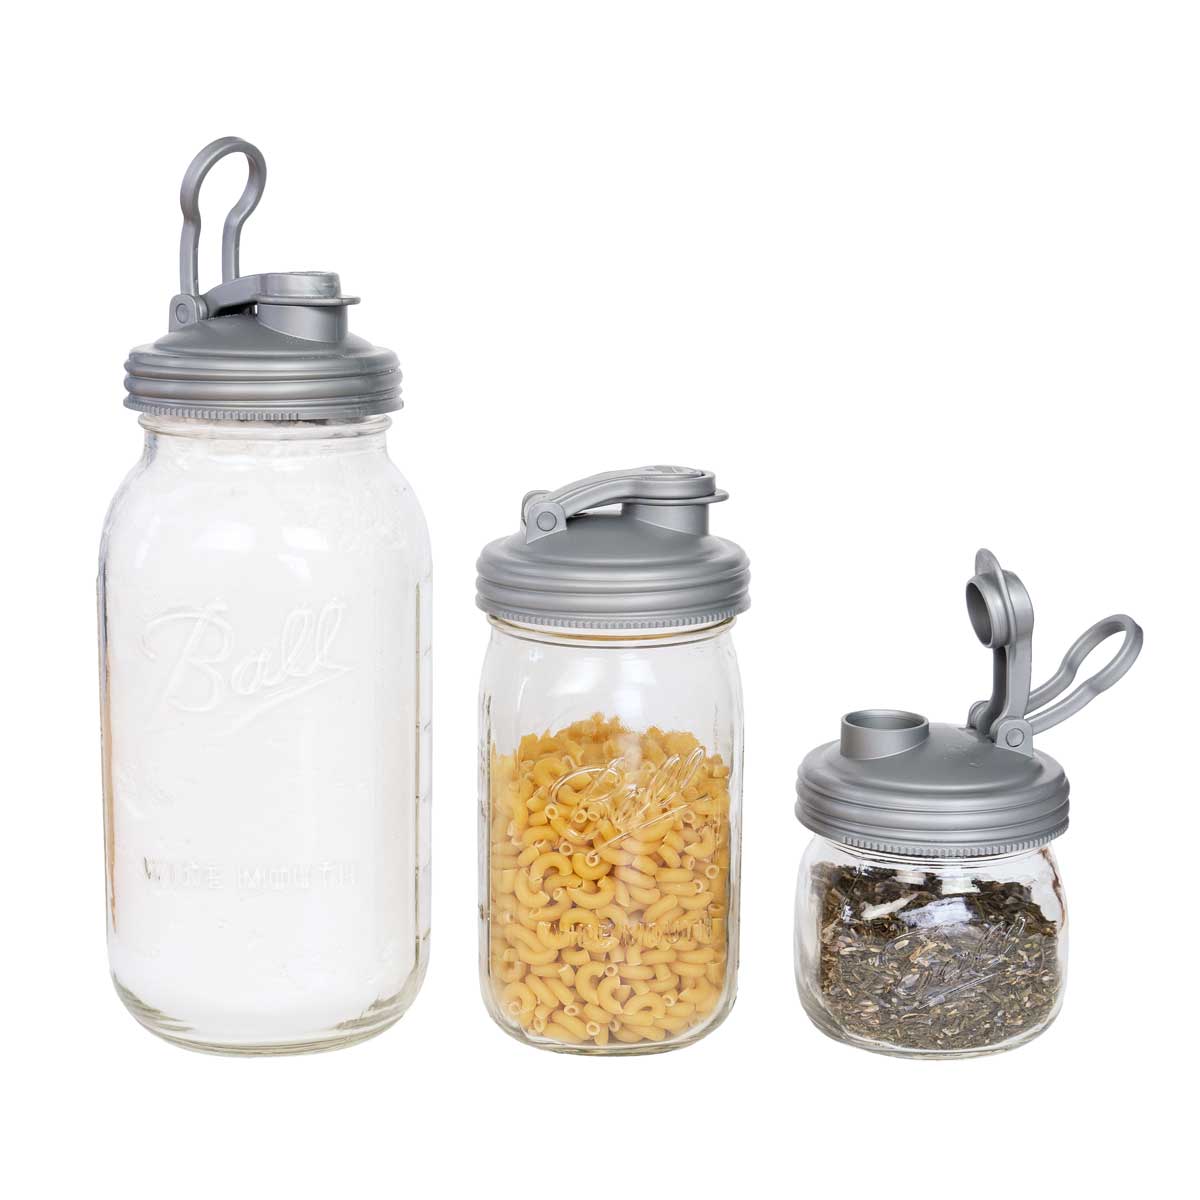 Spice Jars - 4 oz Clear Glass Jar With Sift/Pour Cap - 12 Pack